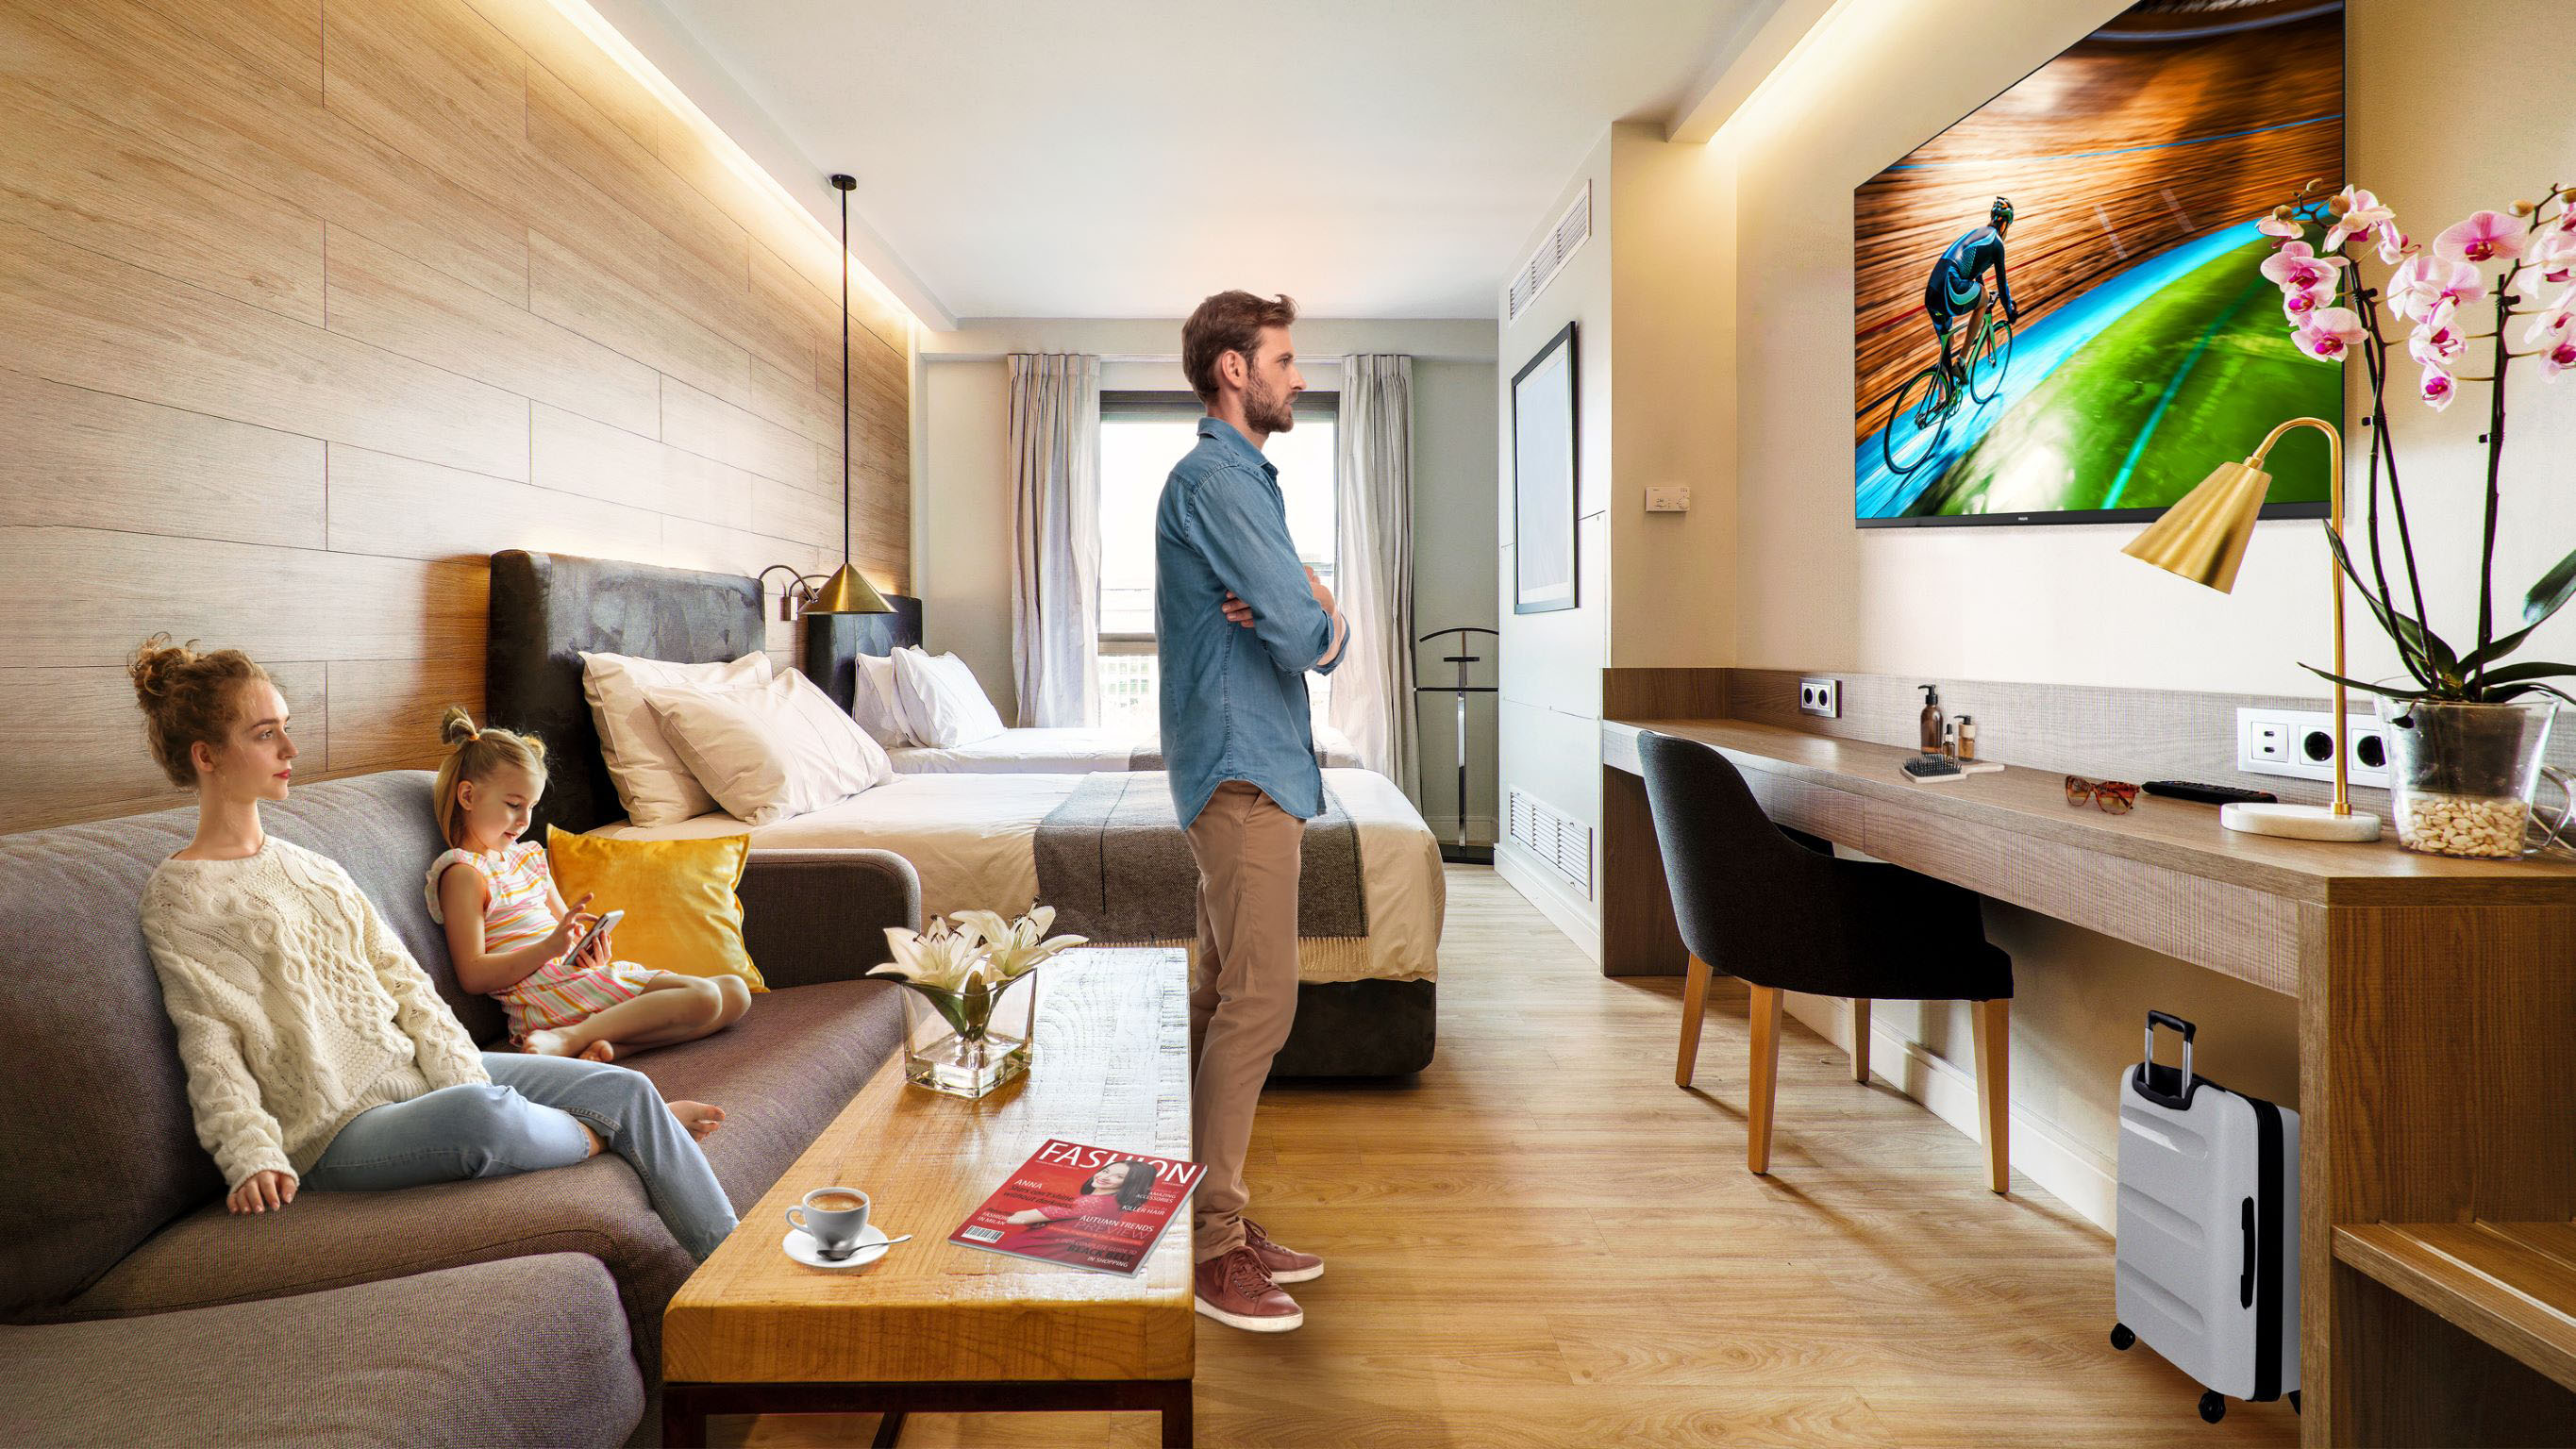 Committed Chromecast Steadfast Feature on Hotel, Business Displays | AVNetwork